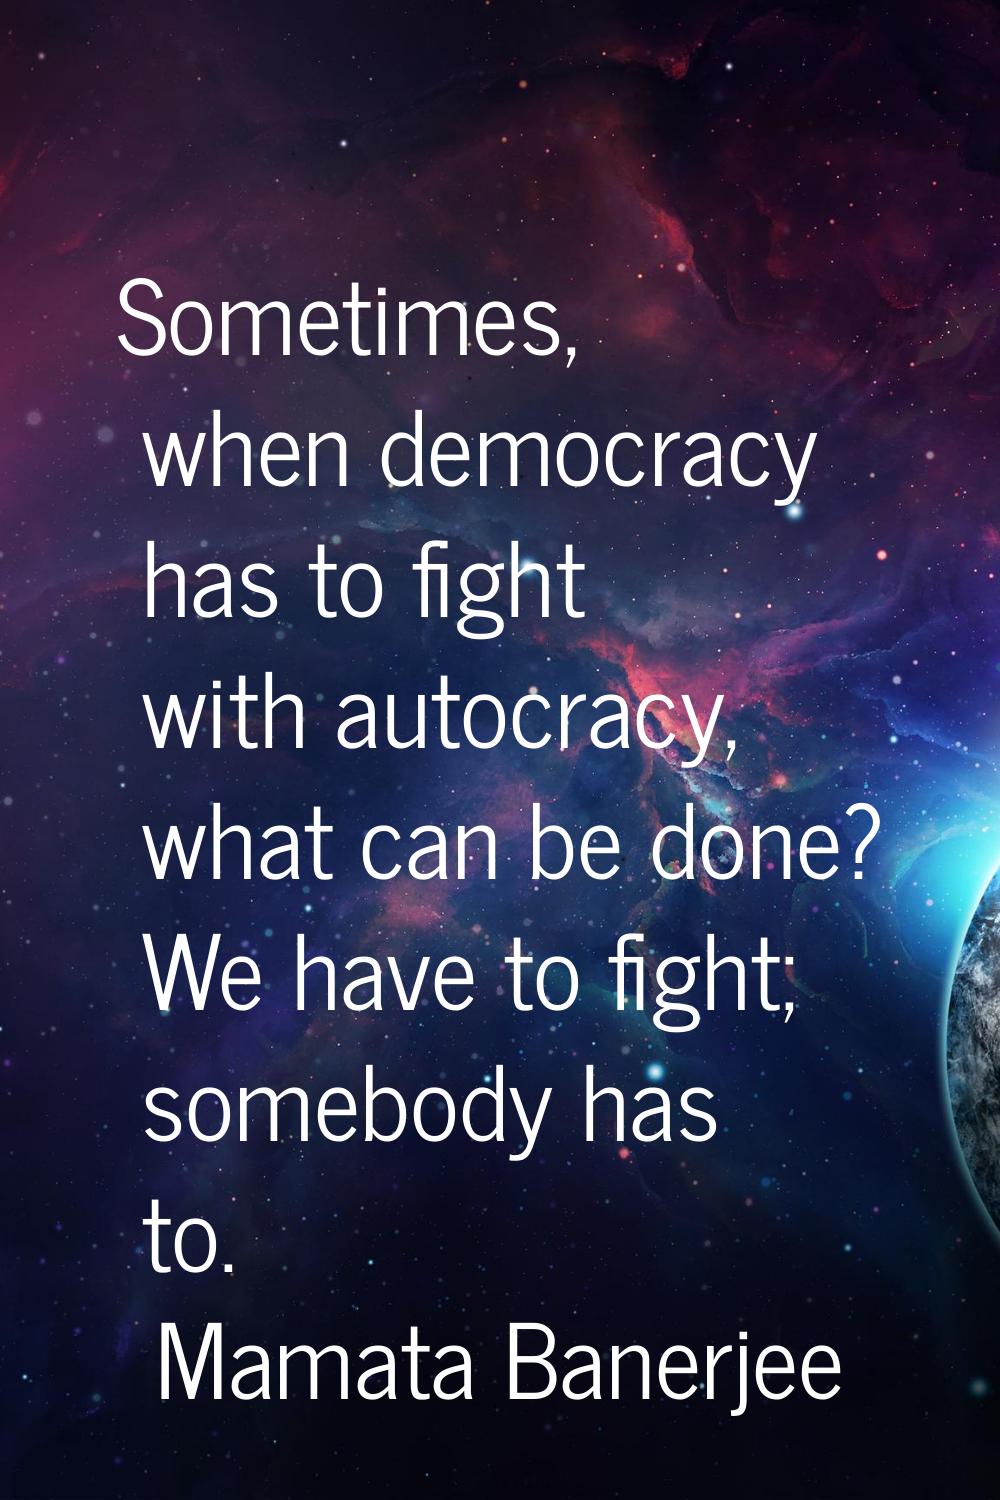 Sometimes, when democracy has to fight with autocracy, what can be done? We have to fight; somebody